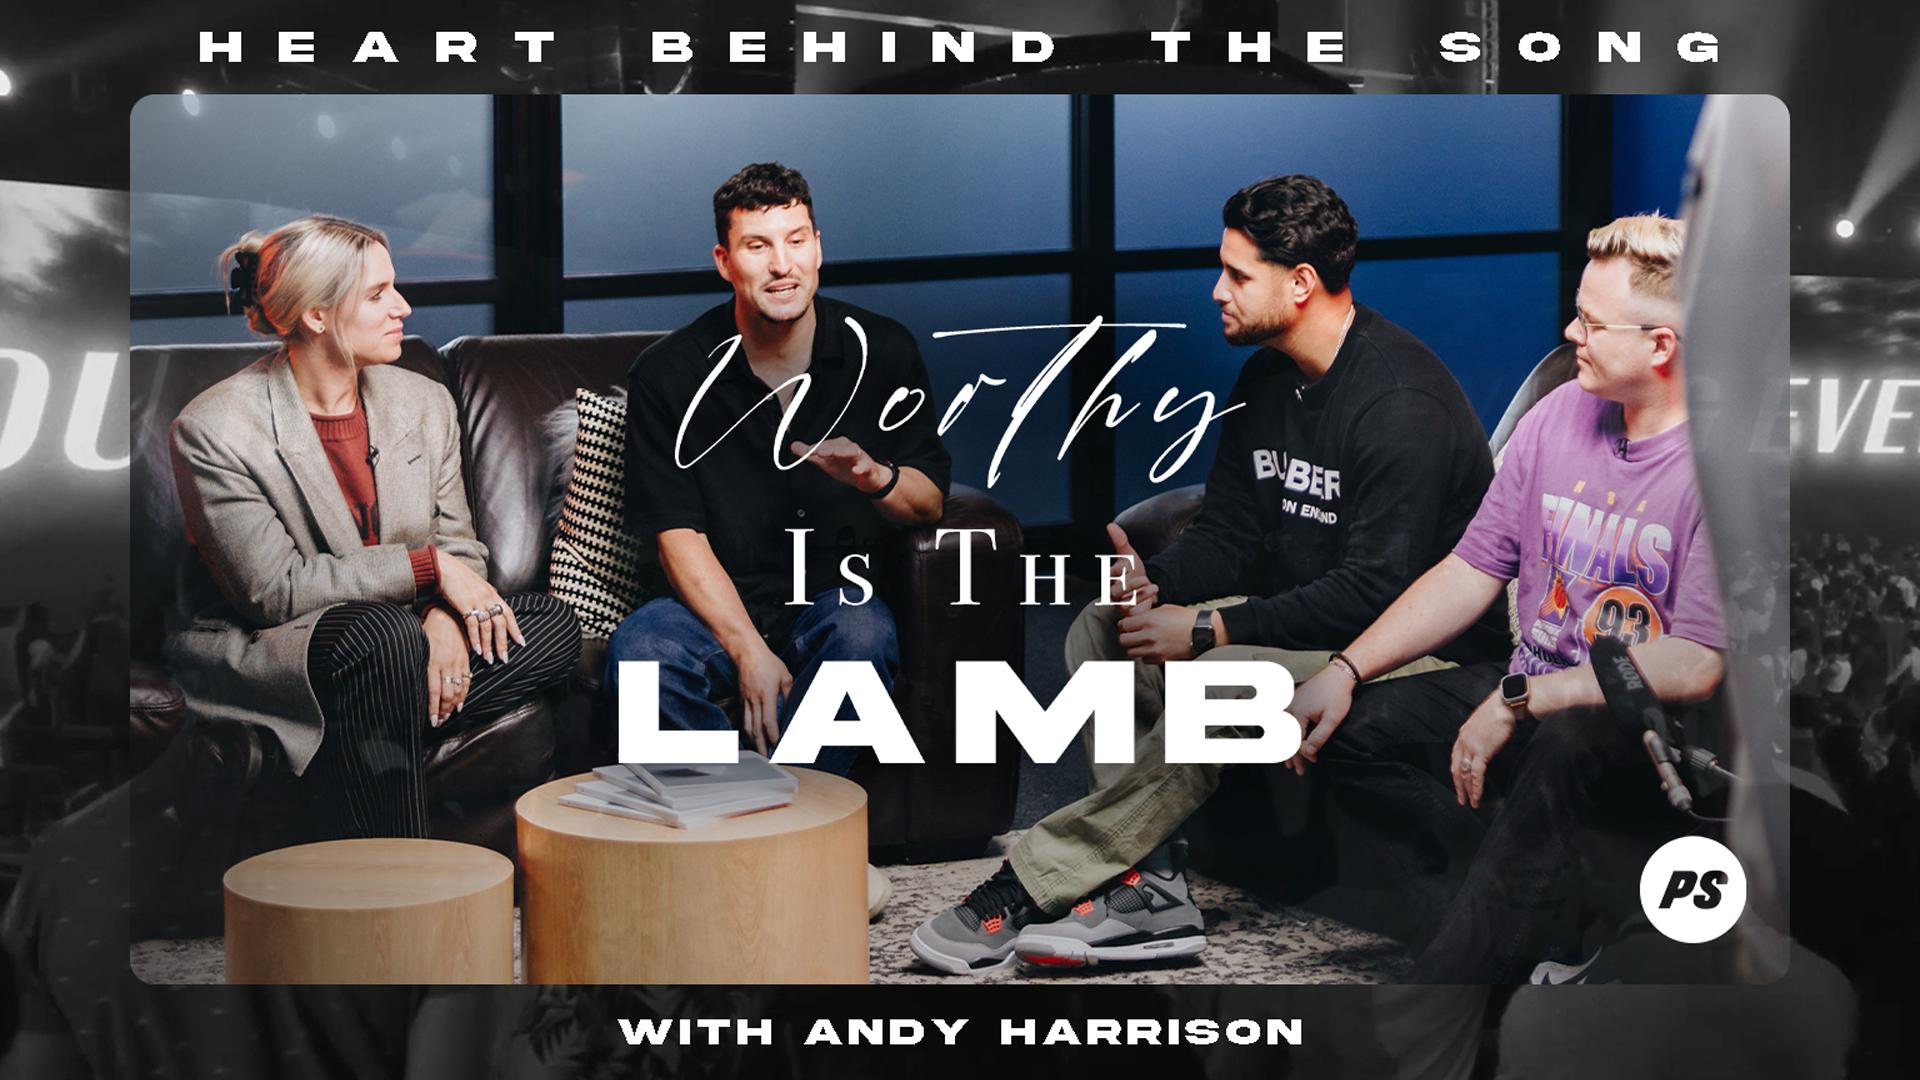 Featured Image for “Heart Behind the Story “Worthy is the Lamb””